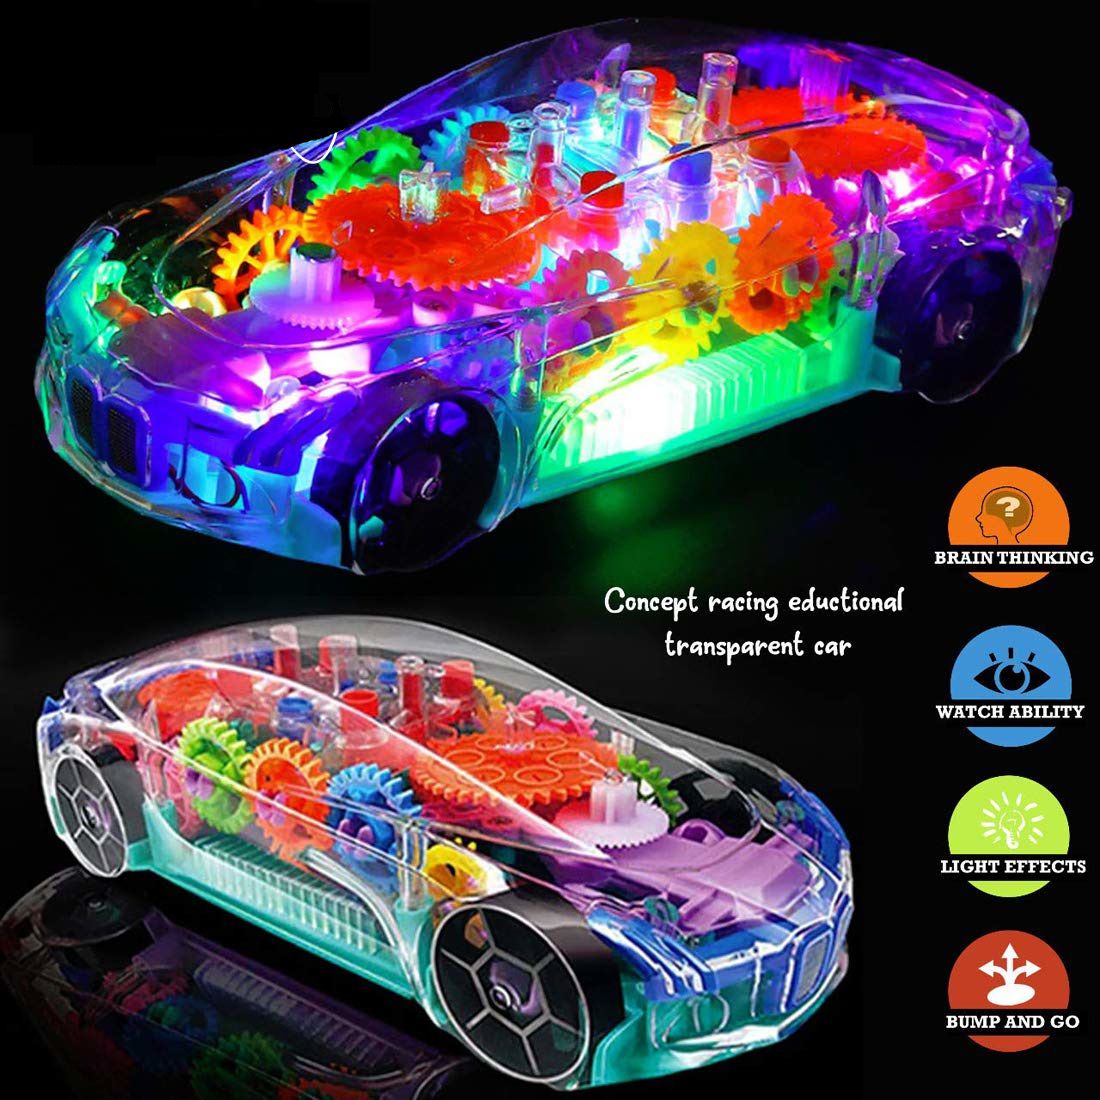 Concept Racing Musical And 3D Lights Transparent Car, Toy for 2-5 Year Kids- Multi Color